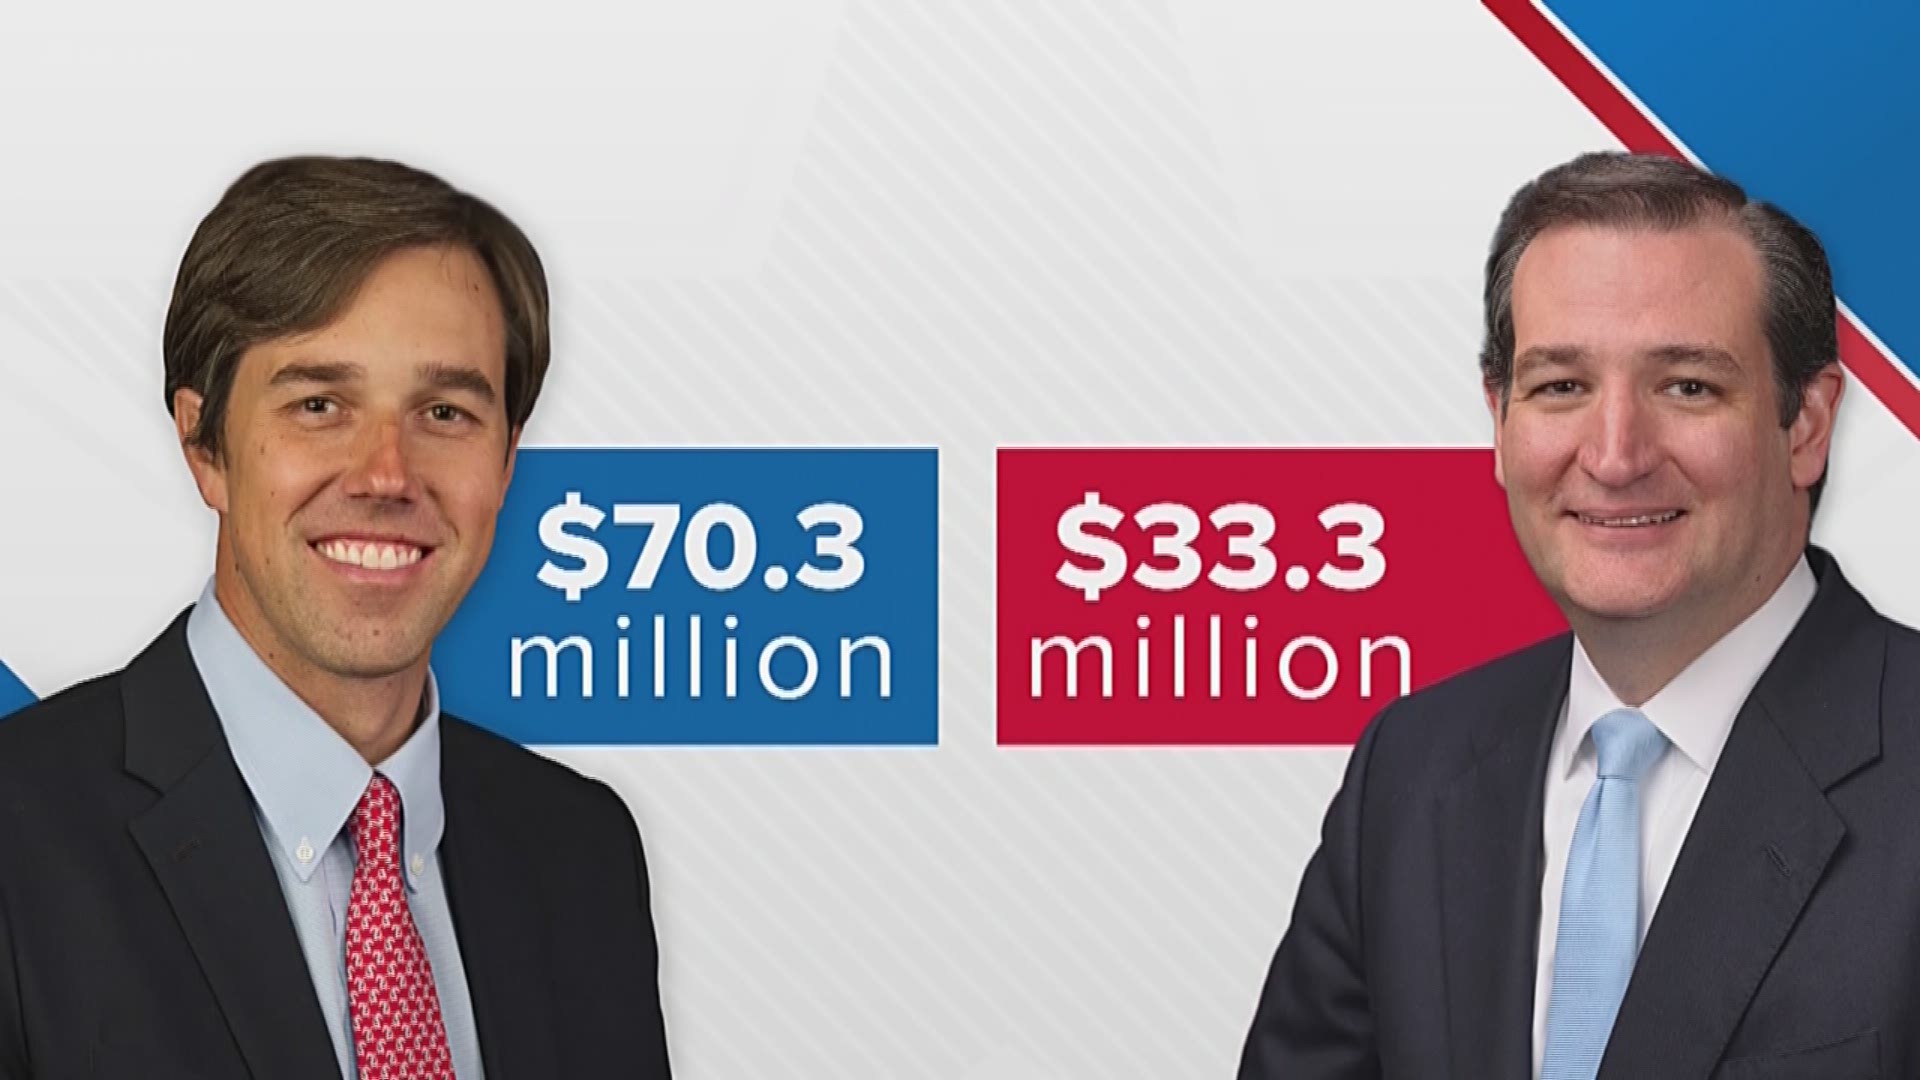 Millions of dollars are being spent on this years election especially the Sentate race between incumbent Ted Cruz and challenger Beto O'Rourke.